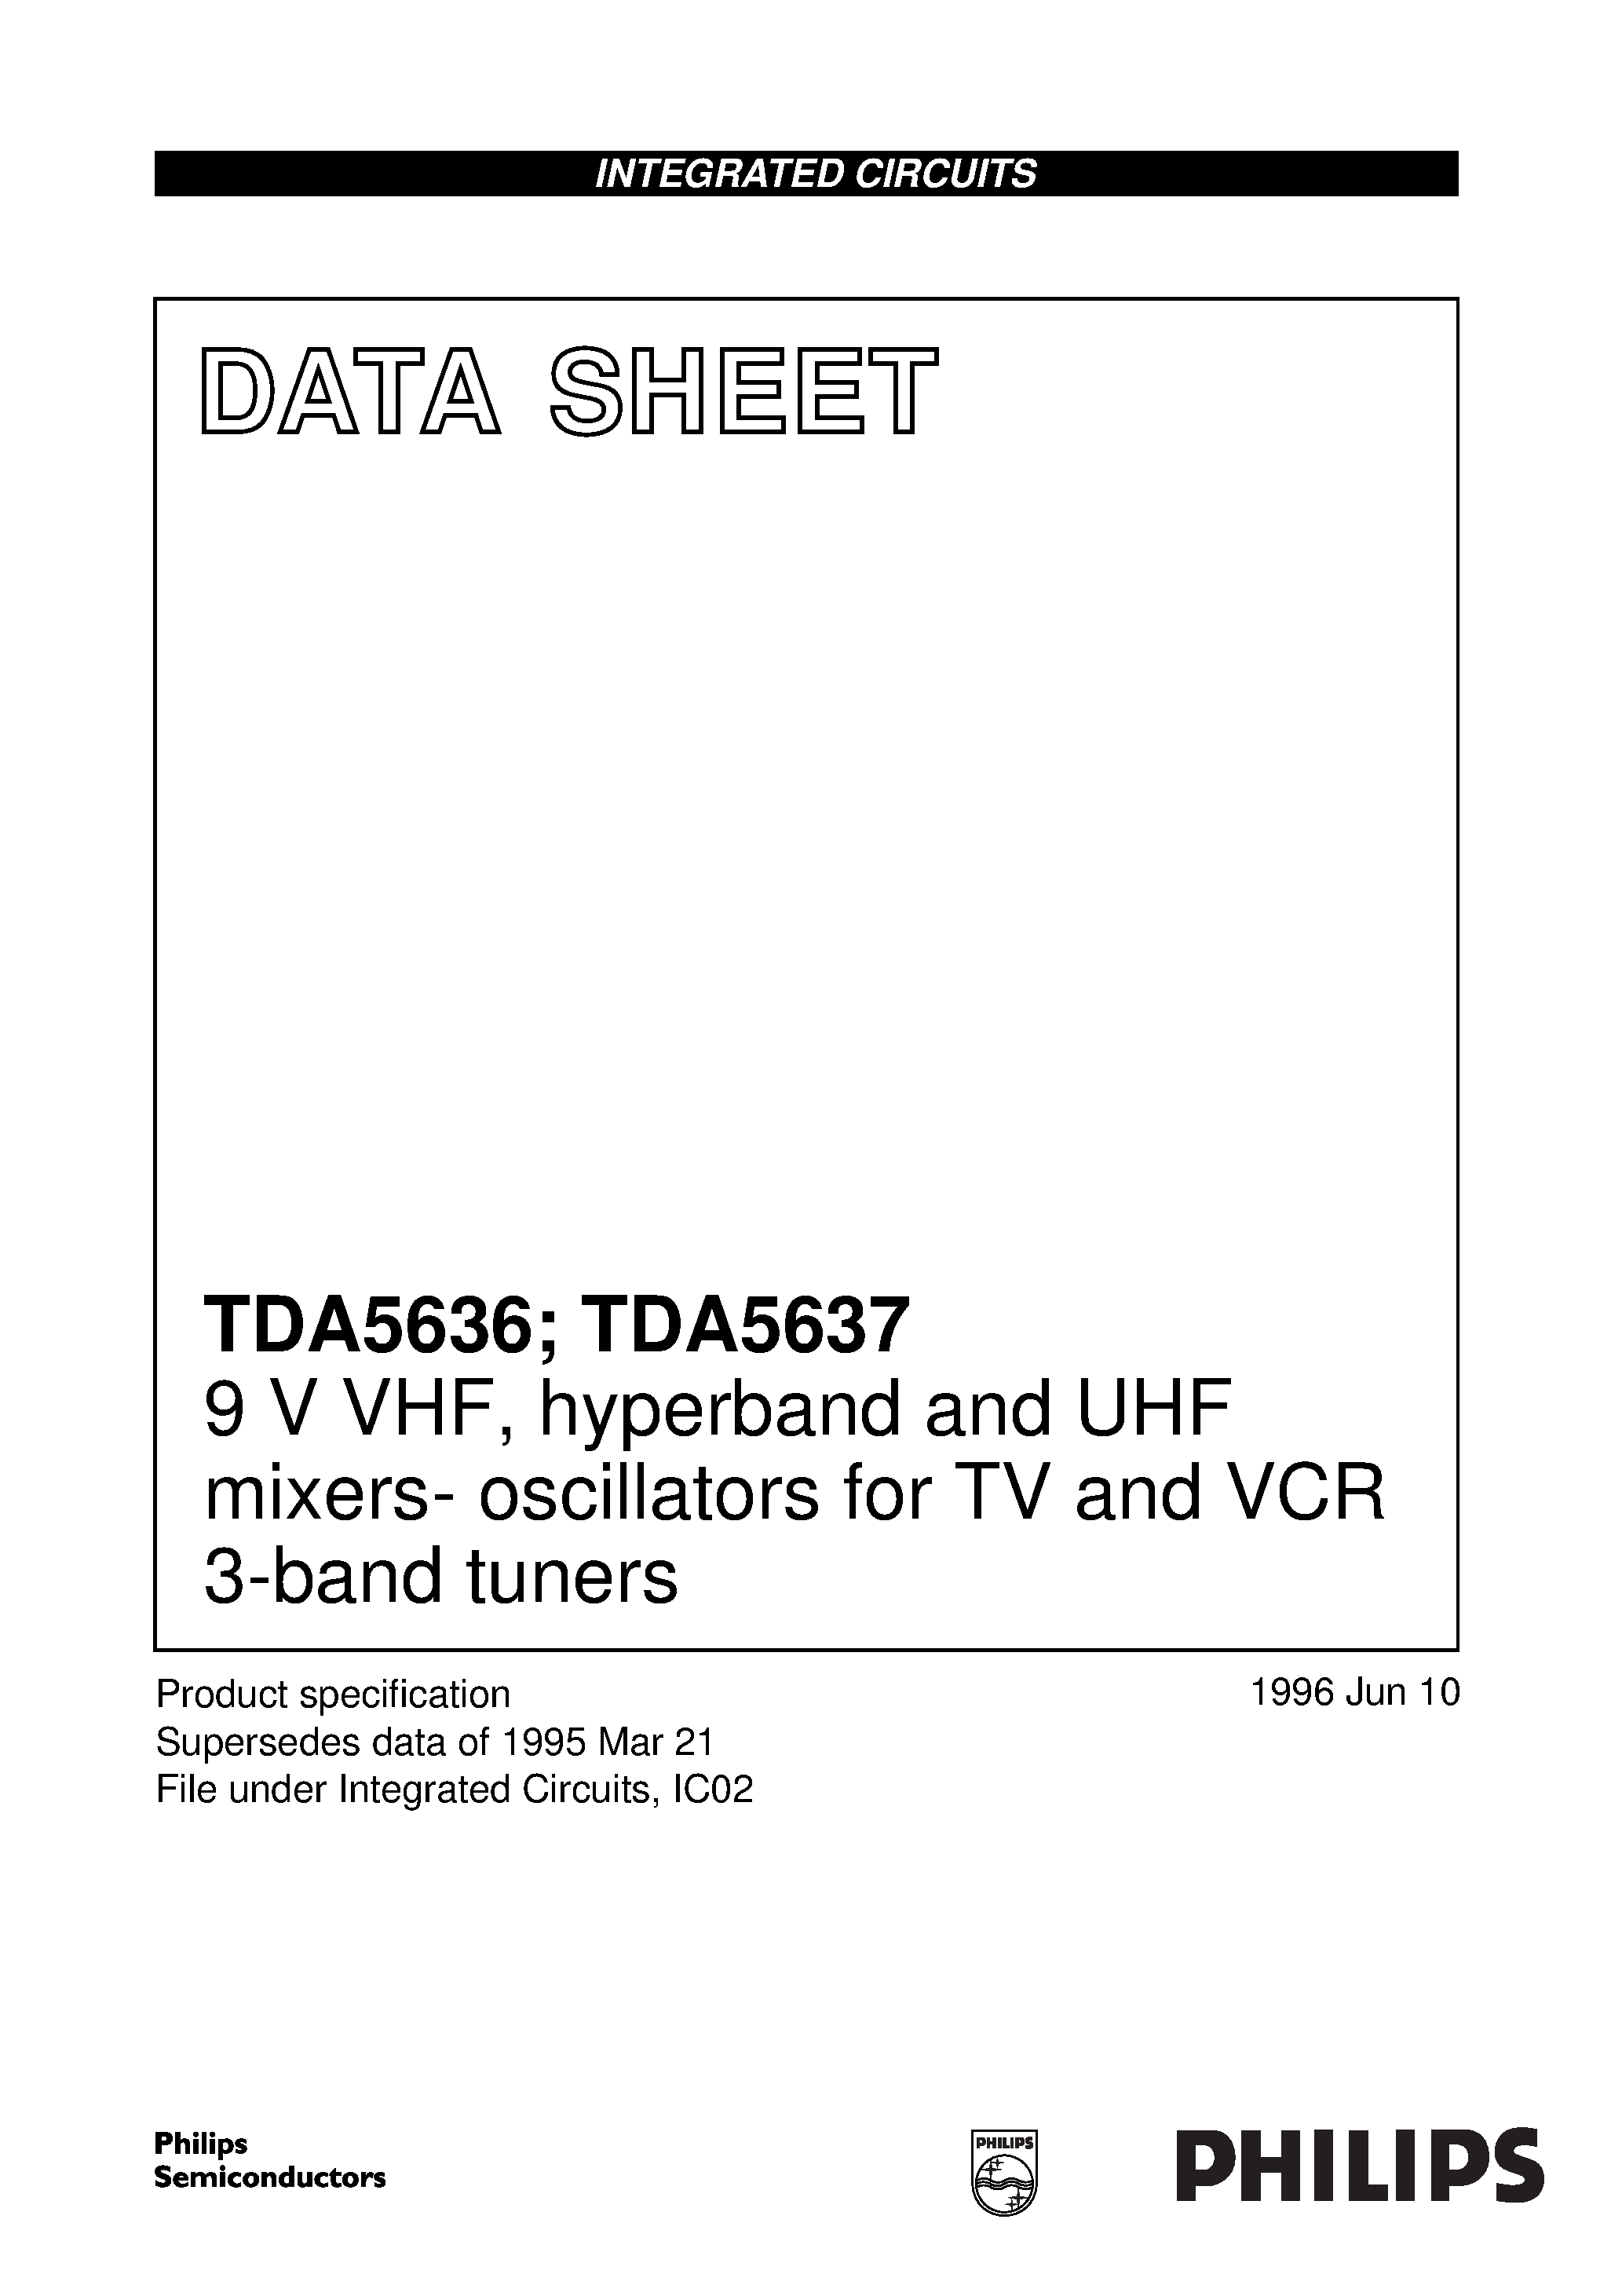 Datasheet TDA5636T - 9 V VHF/ hyperband and UHF mixers- oscillators for TV and VCR 3-band tuners page 1